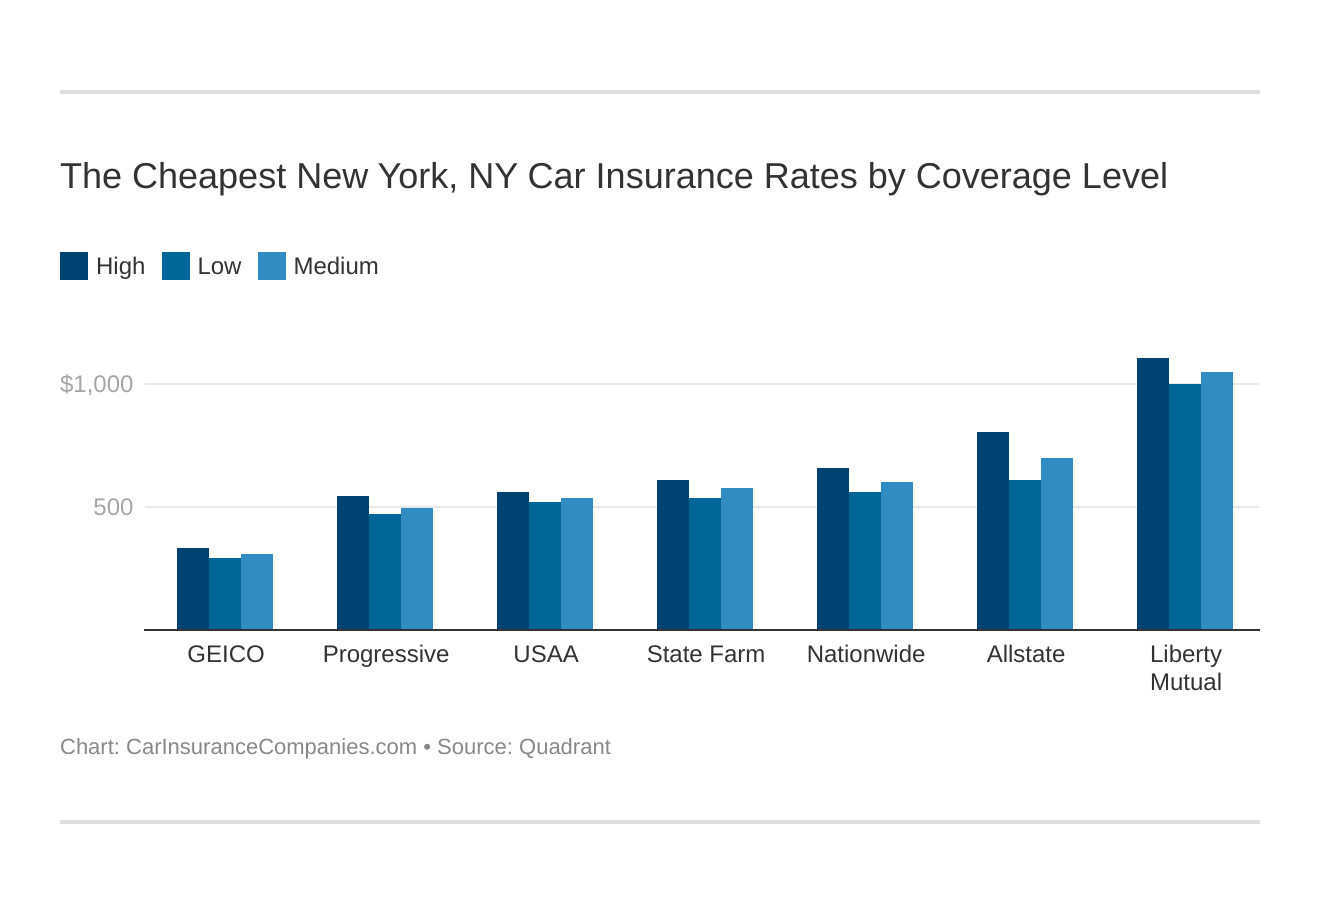 The Cheapest New York, NY Car Insurance Rates by Coverage Level